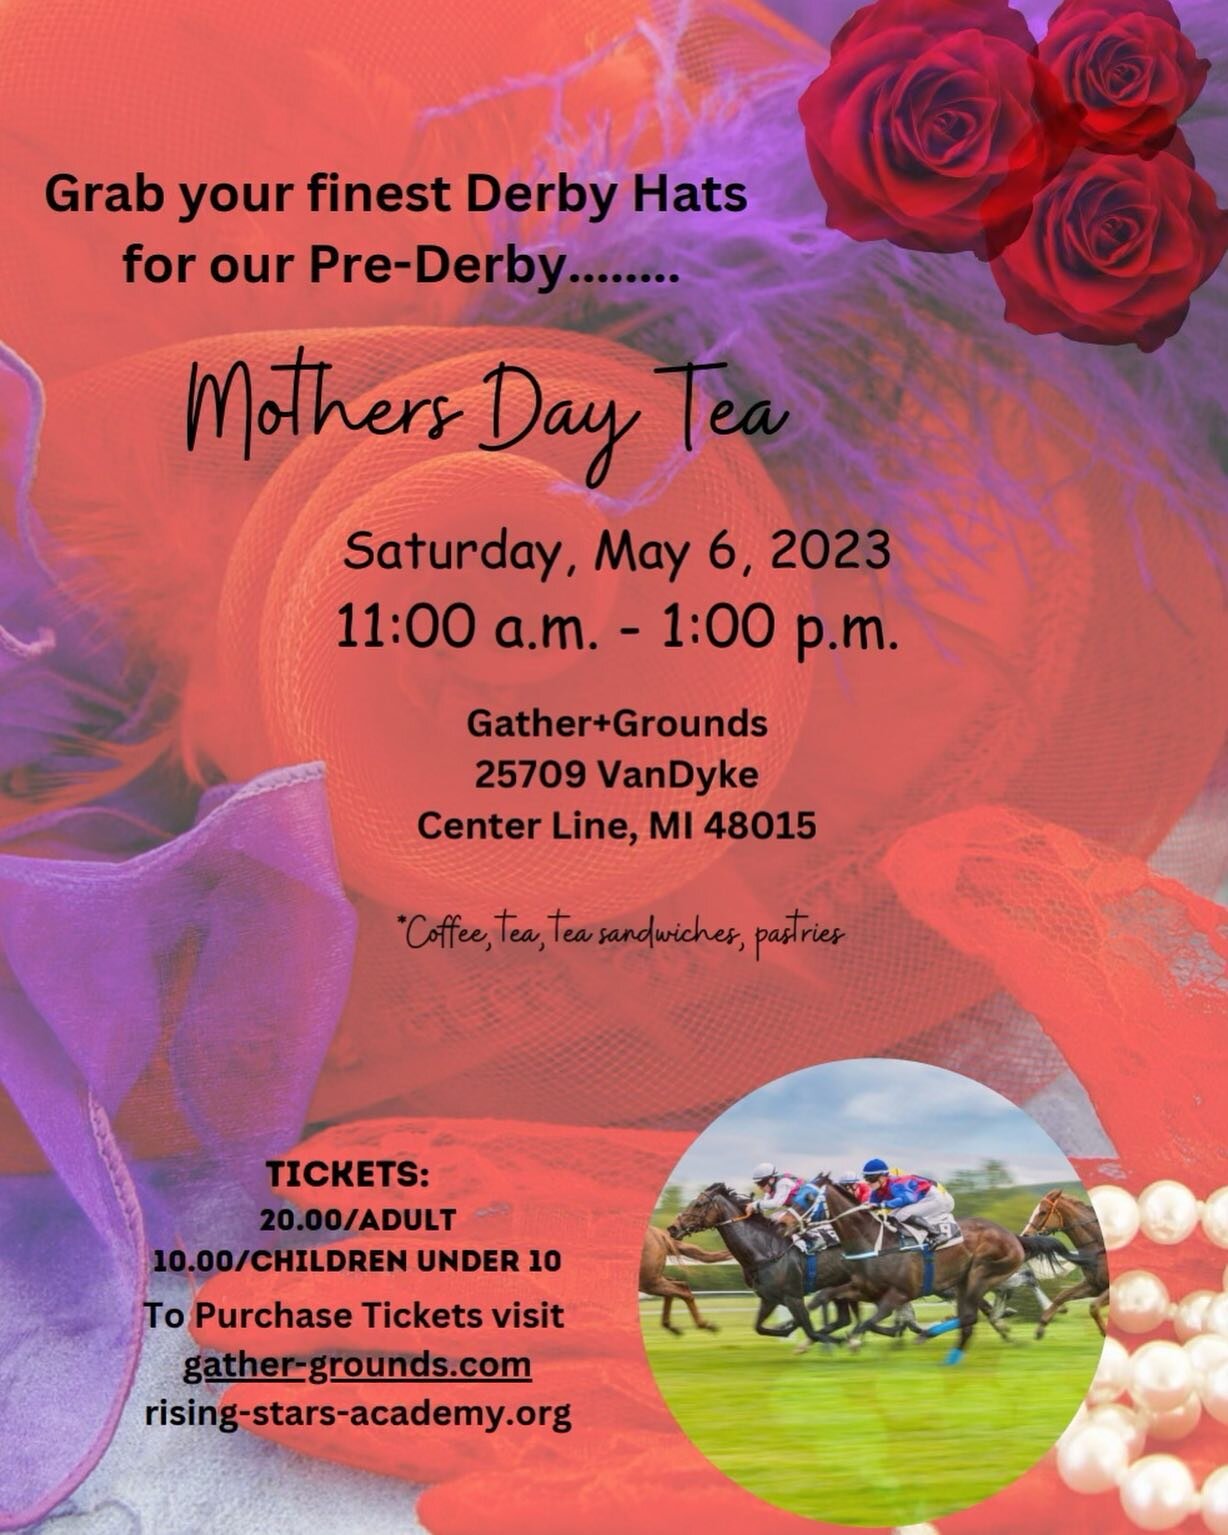 Please join us on Mother&rsquo;s Day at @gather_grounds for a special Mother&rsquo;s Day tea. Don&rsquo;t forget your derby hats!